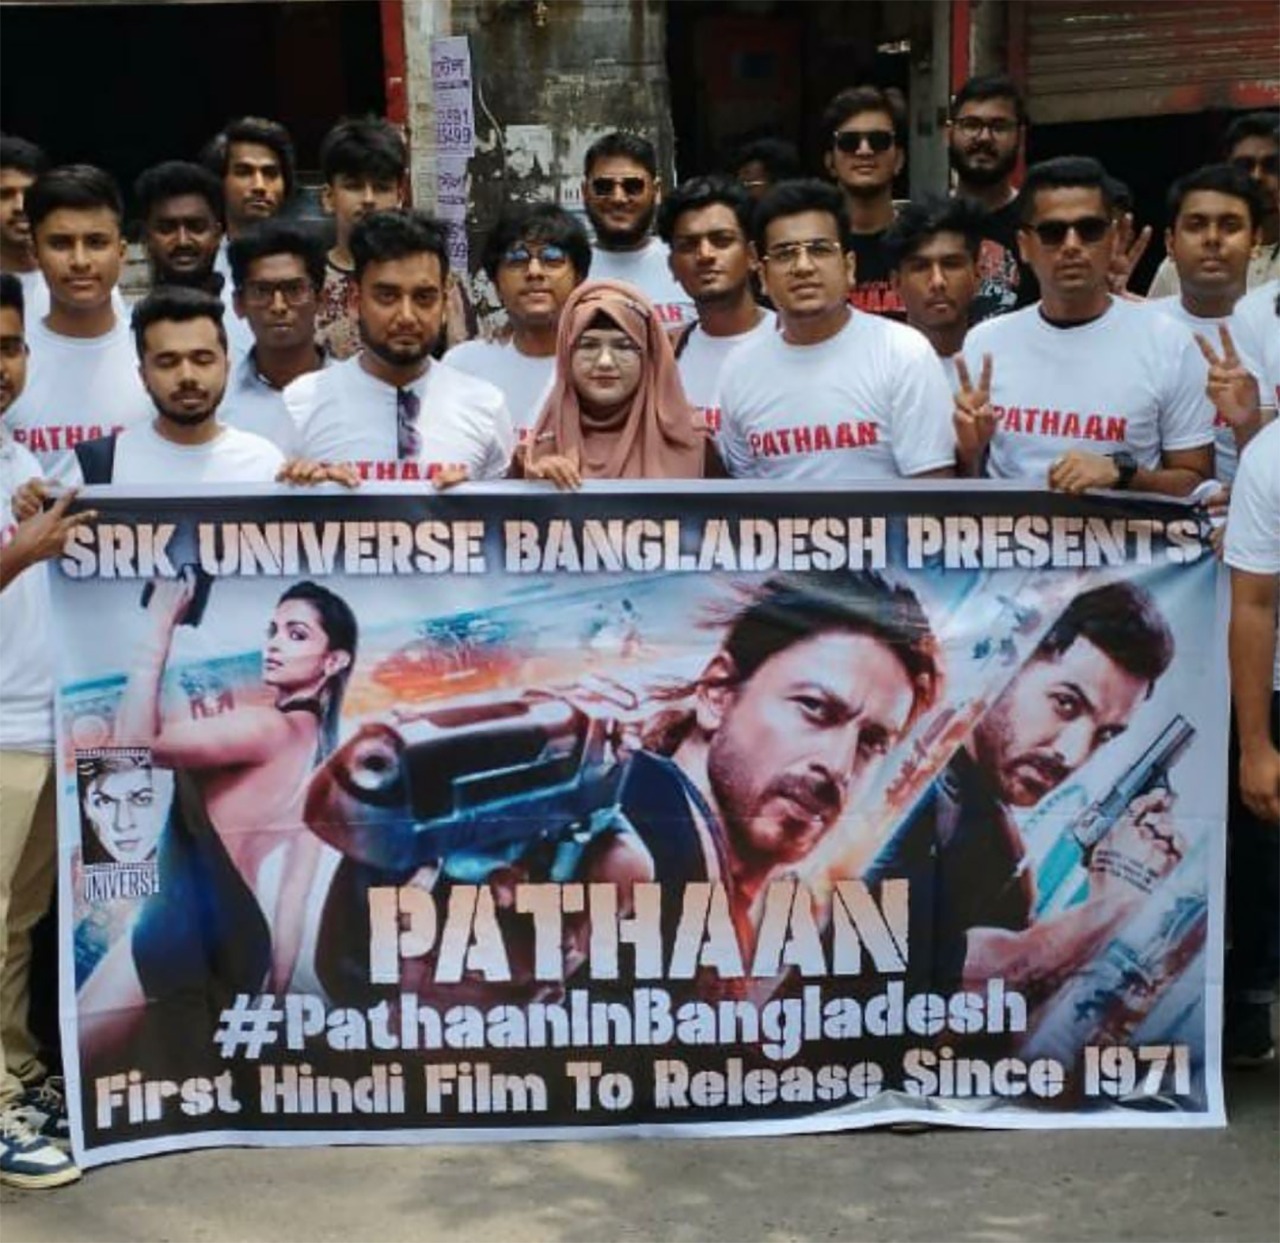 Pathaan Box Office Shah Rukh Khan-starrer takes a TERRIFIC opening in Bangladesh; grosses 25 lakhs Bangladeshi takas [Rs. 19.13 lakhs] from 41 screens on day 1